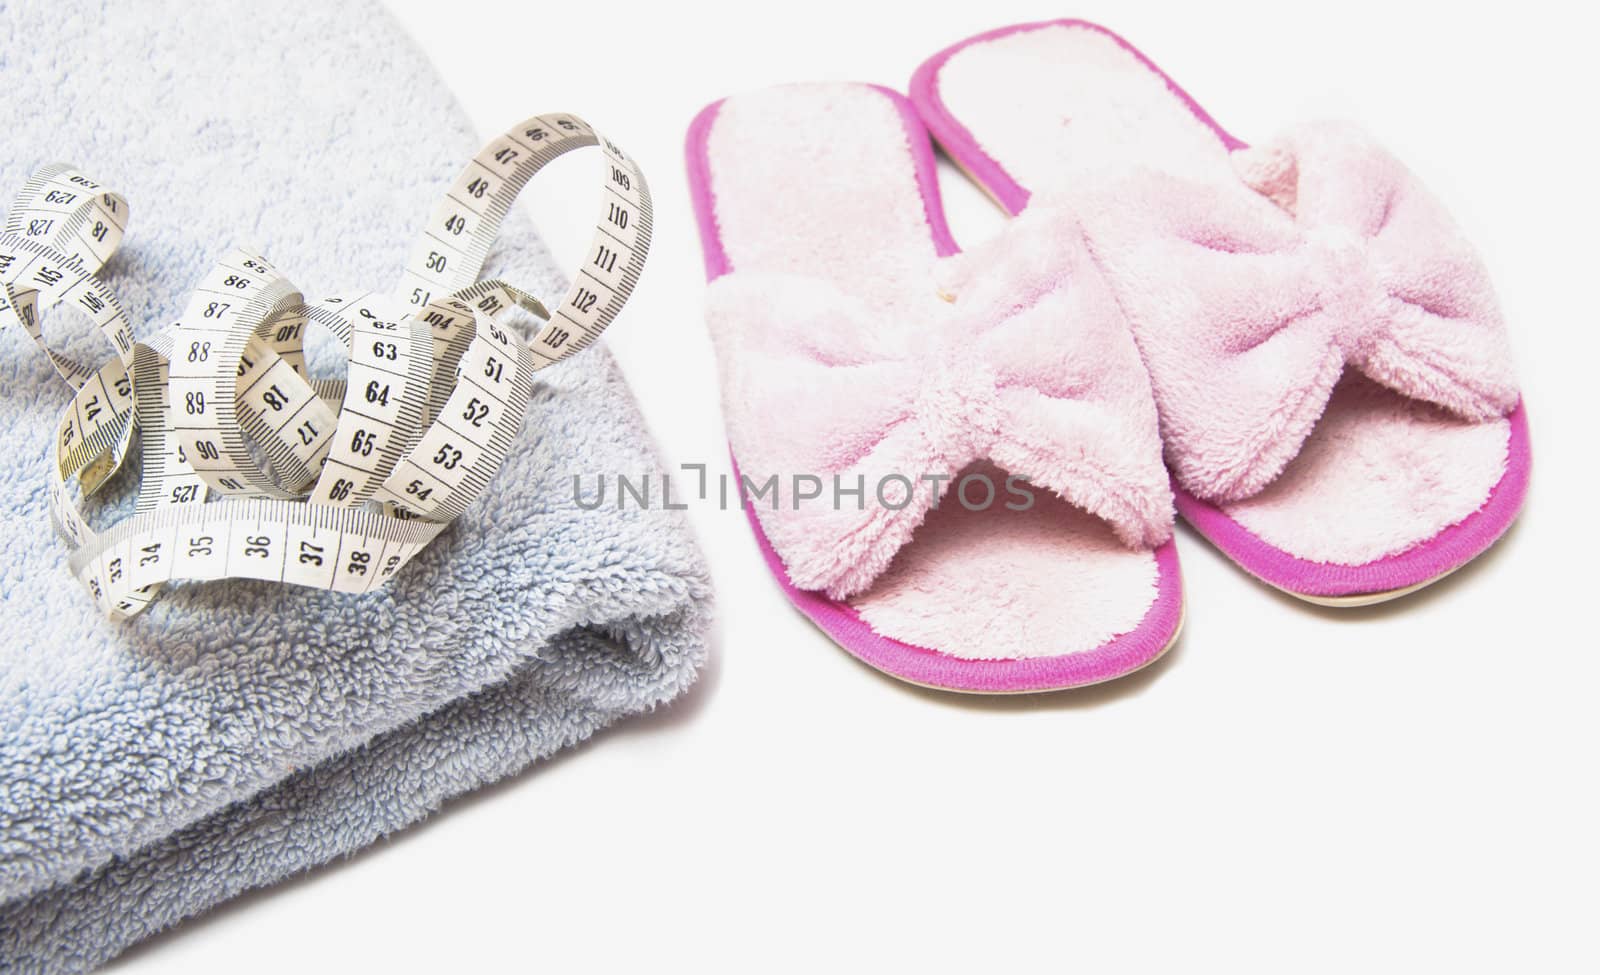 slippers, grey folded towel and metr by inxti